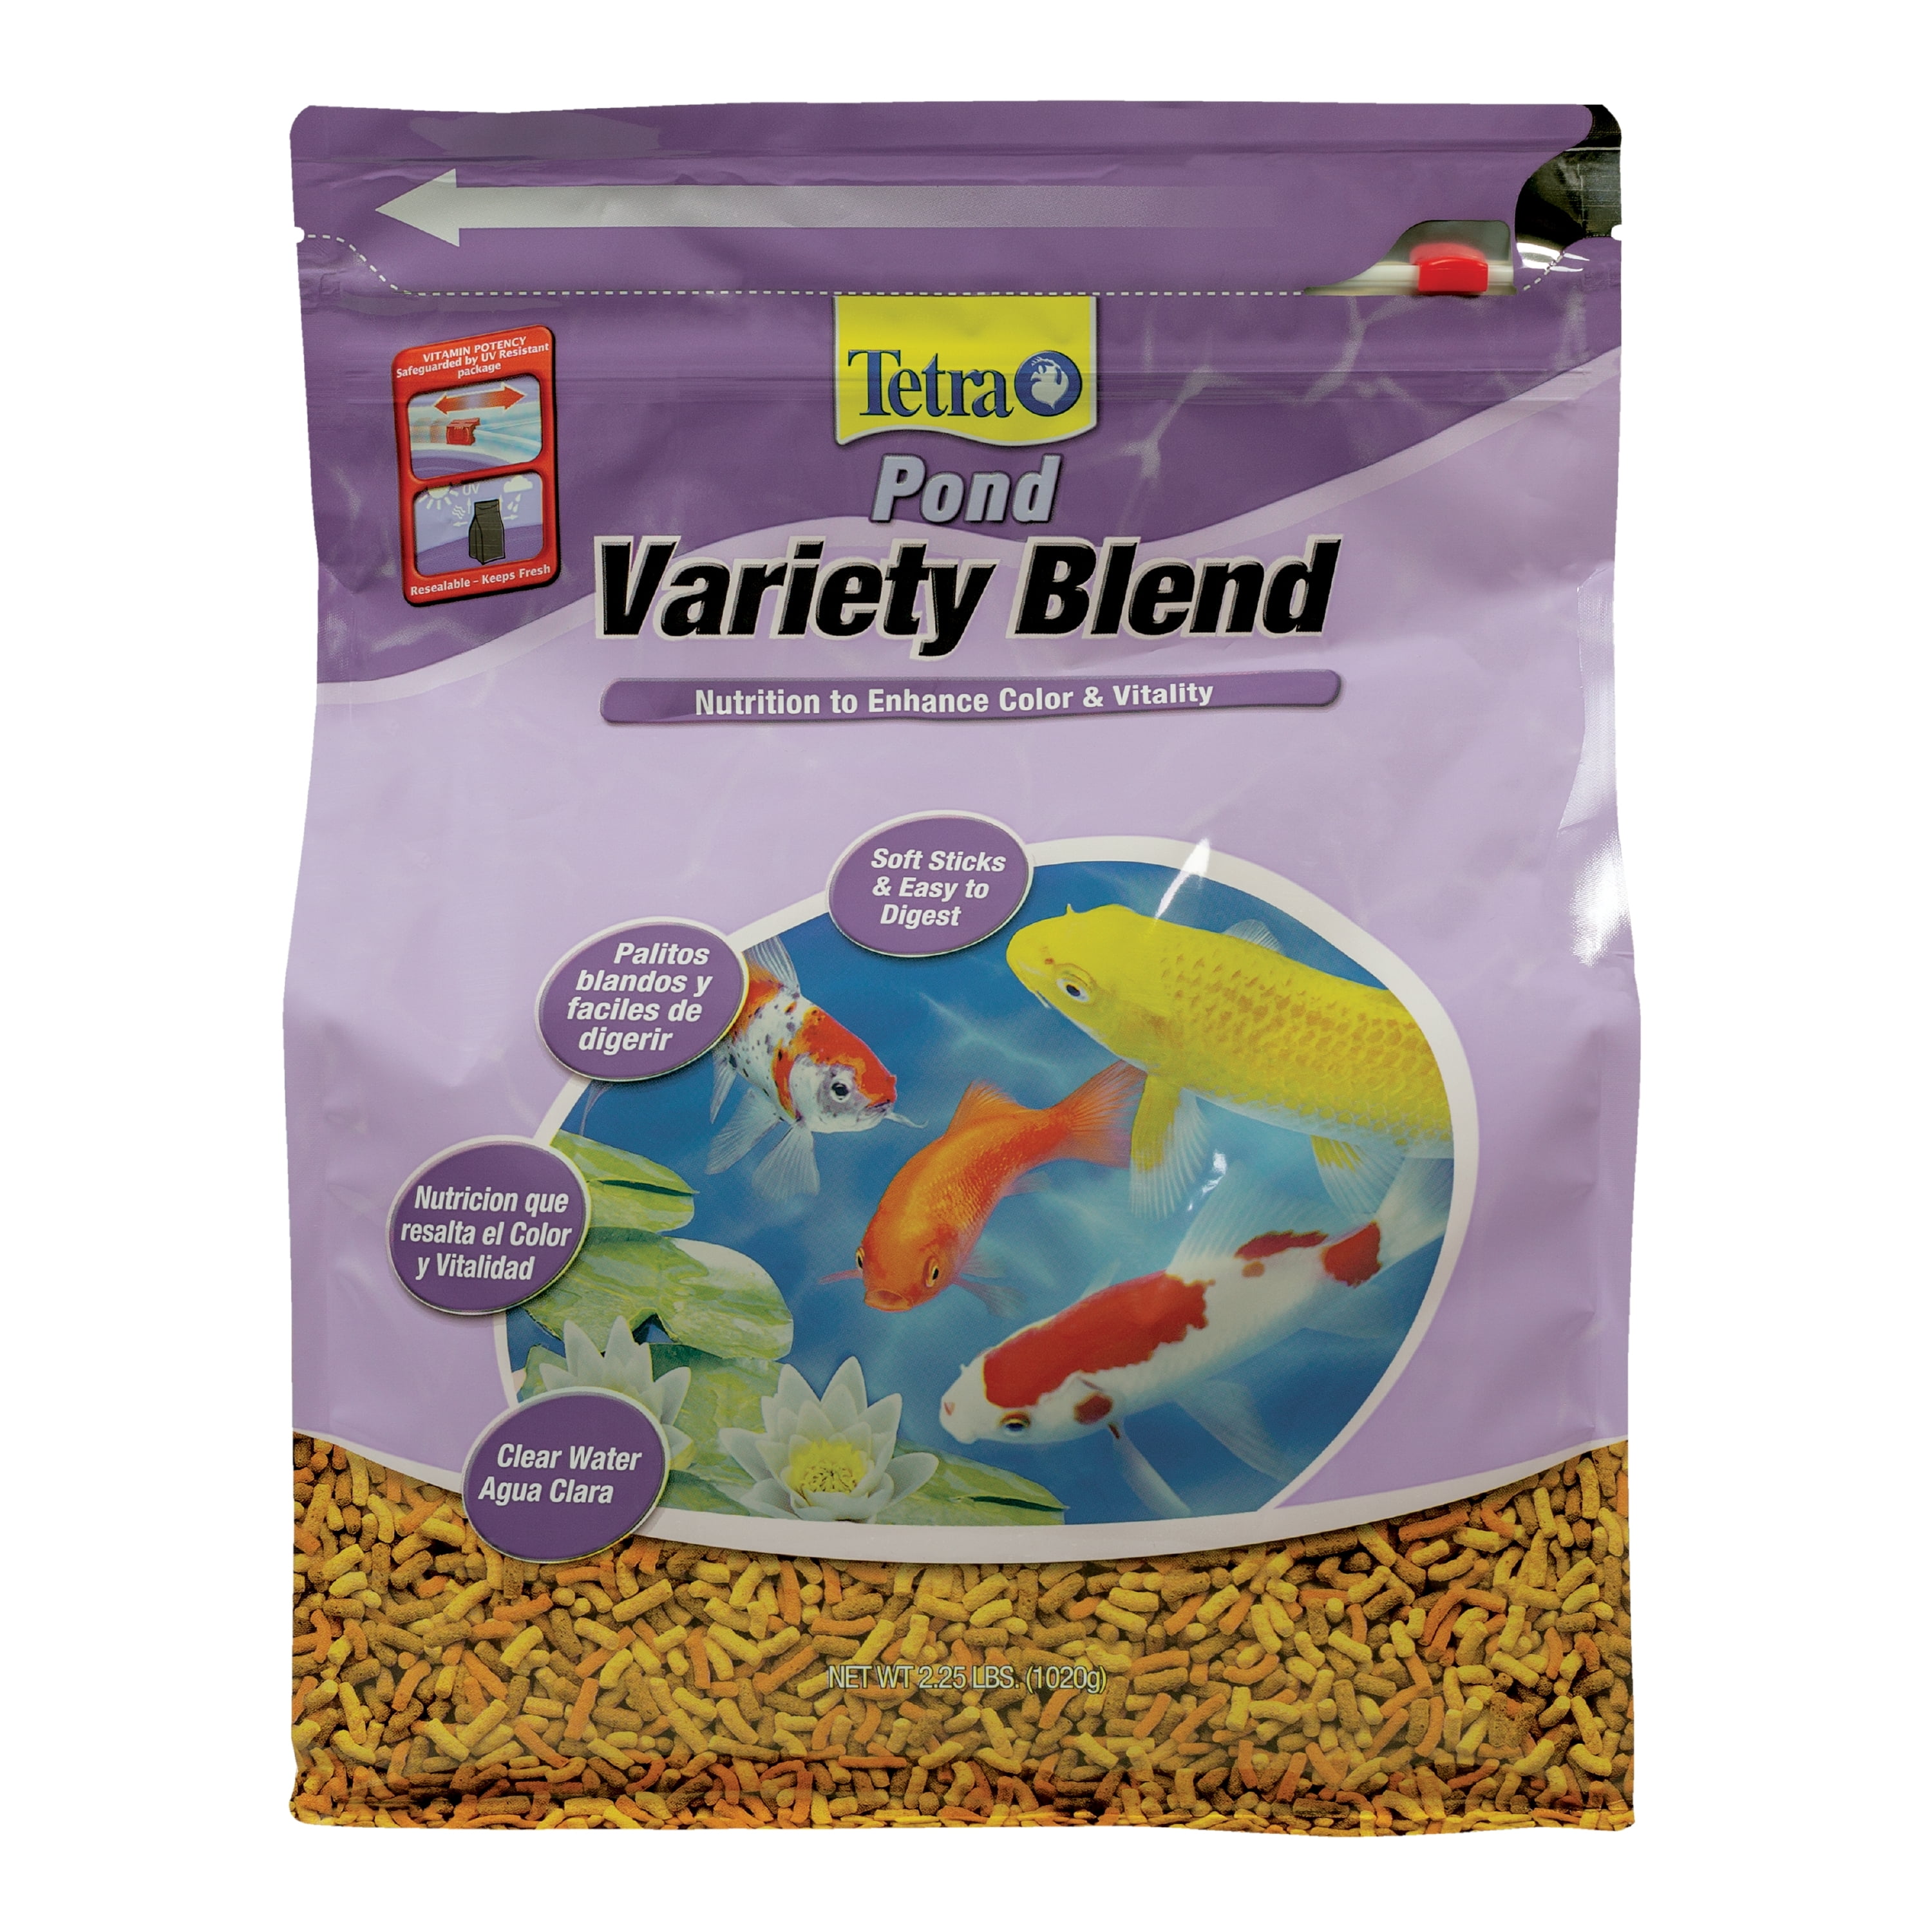 TetraPond Variety Blend, Pond Fish Food, for Goldfish and Koi Yellow 2.25  Pound (Pack of 1)